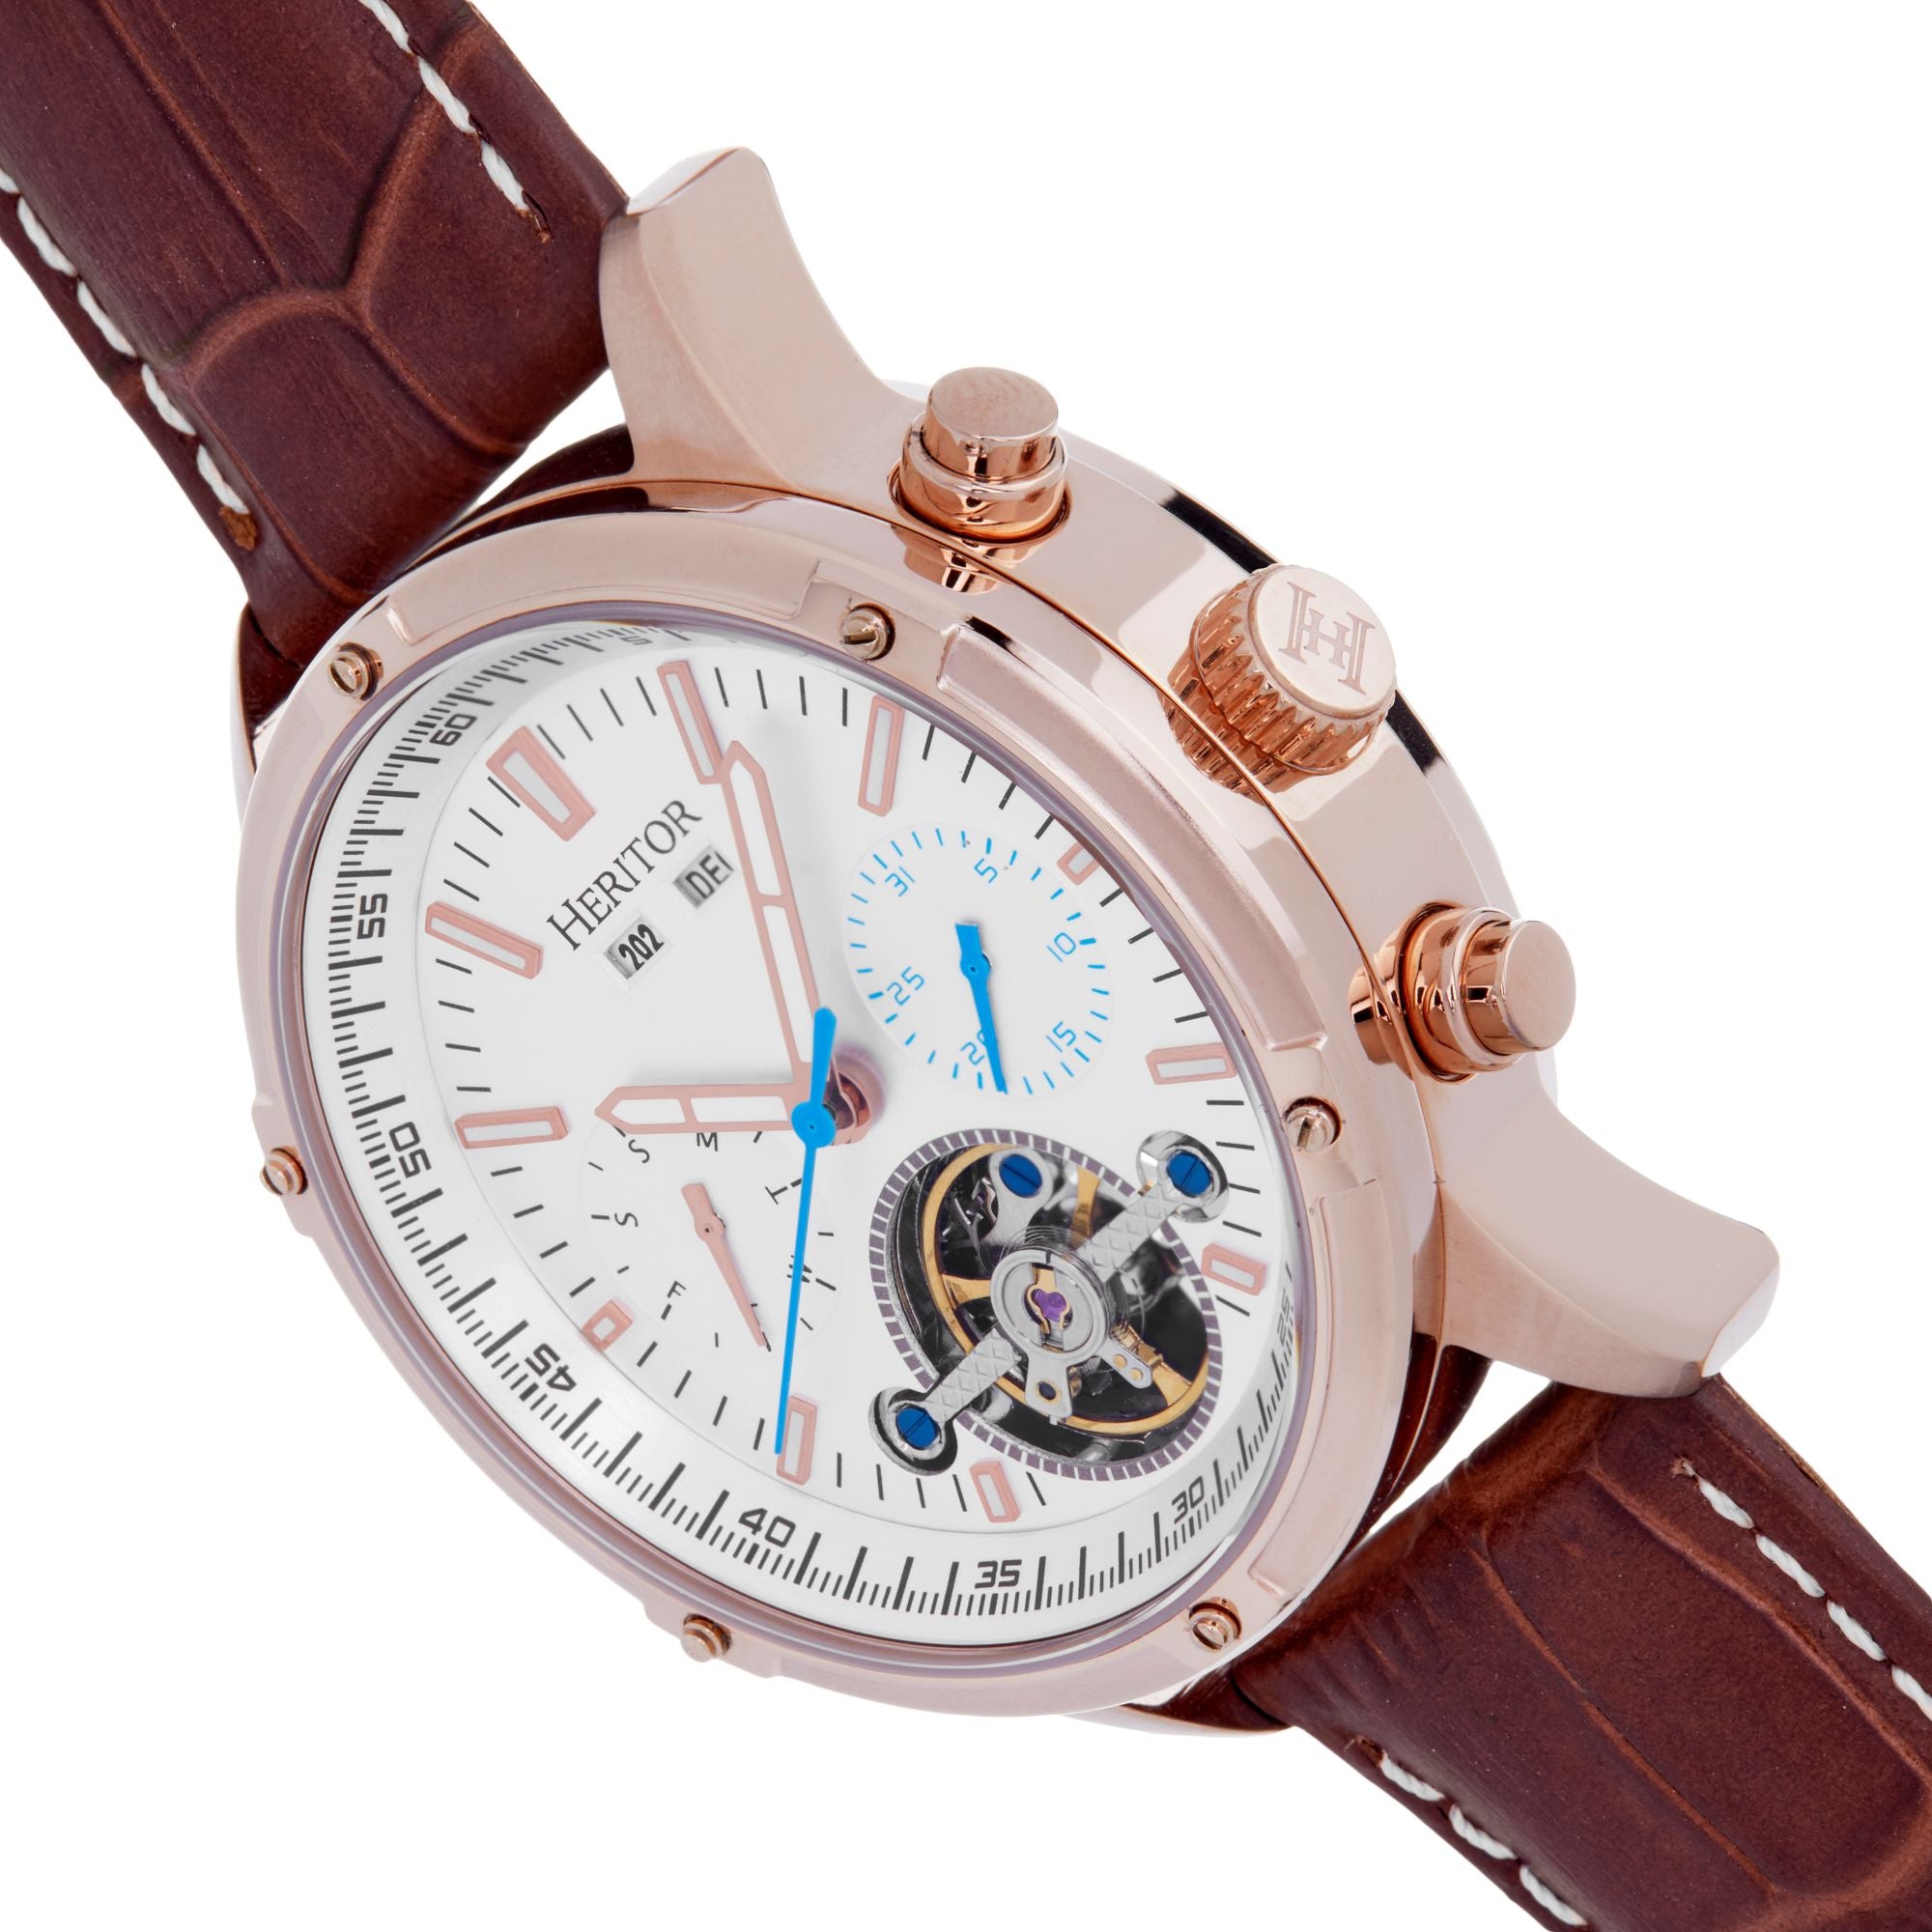 Heritor Automatic Wilhelm Semi-Skeleton Leather-Band Watch w/Day/Date - Brown/Rose Gold - HERHS2106